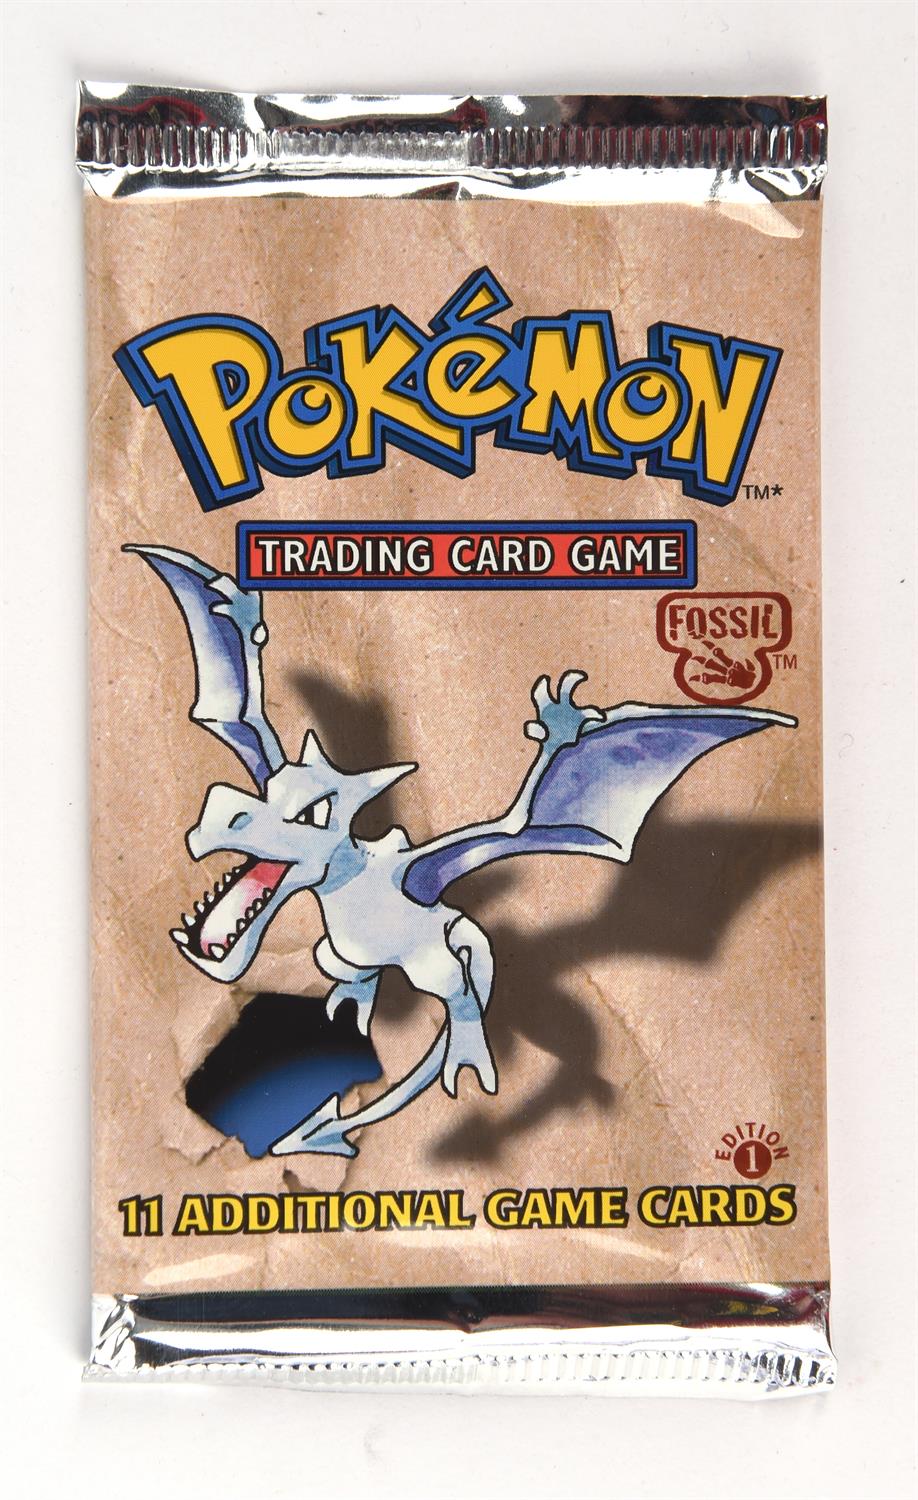 Pokemon TCG. Pokémon Fossil 1st edition sealed Booster Pack, 21.2g. This item is from the